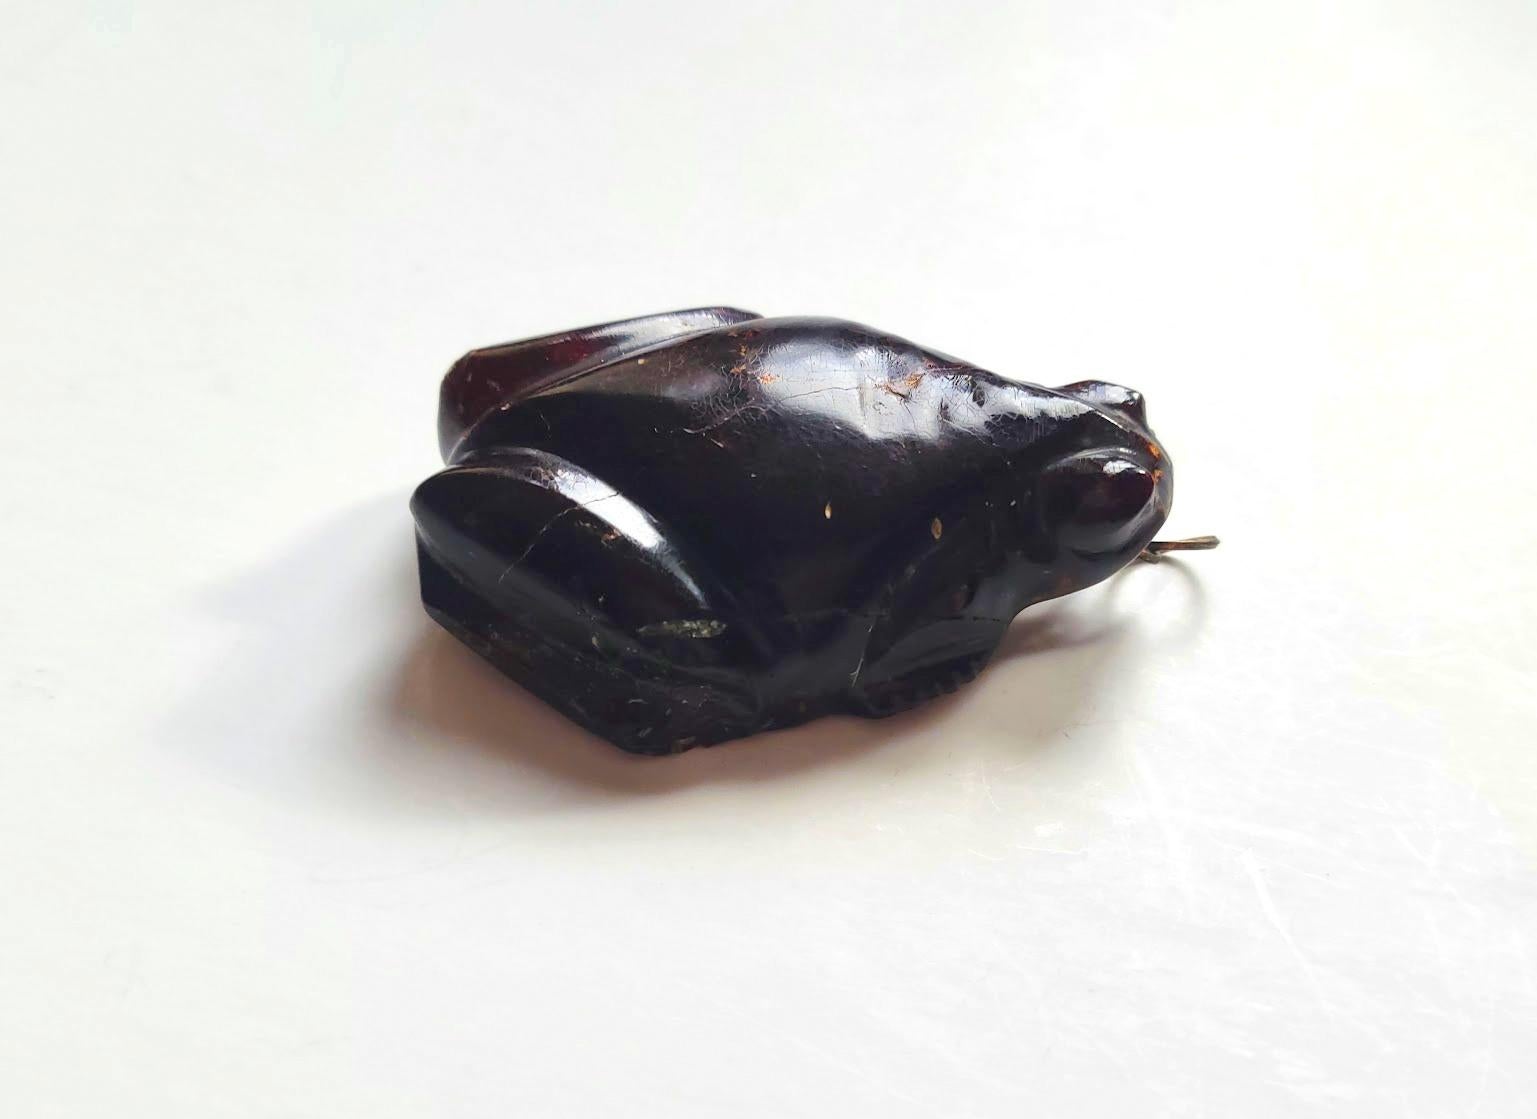 What an absolutely amazing, very unusual antique carved amber figural frog pendant for a necklace. Japanese artifact!
The color of amber is saturated tea with a cherry tint! Very valuable! The color is authentic and natural. This frog consists of